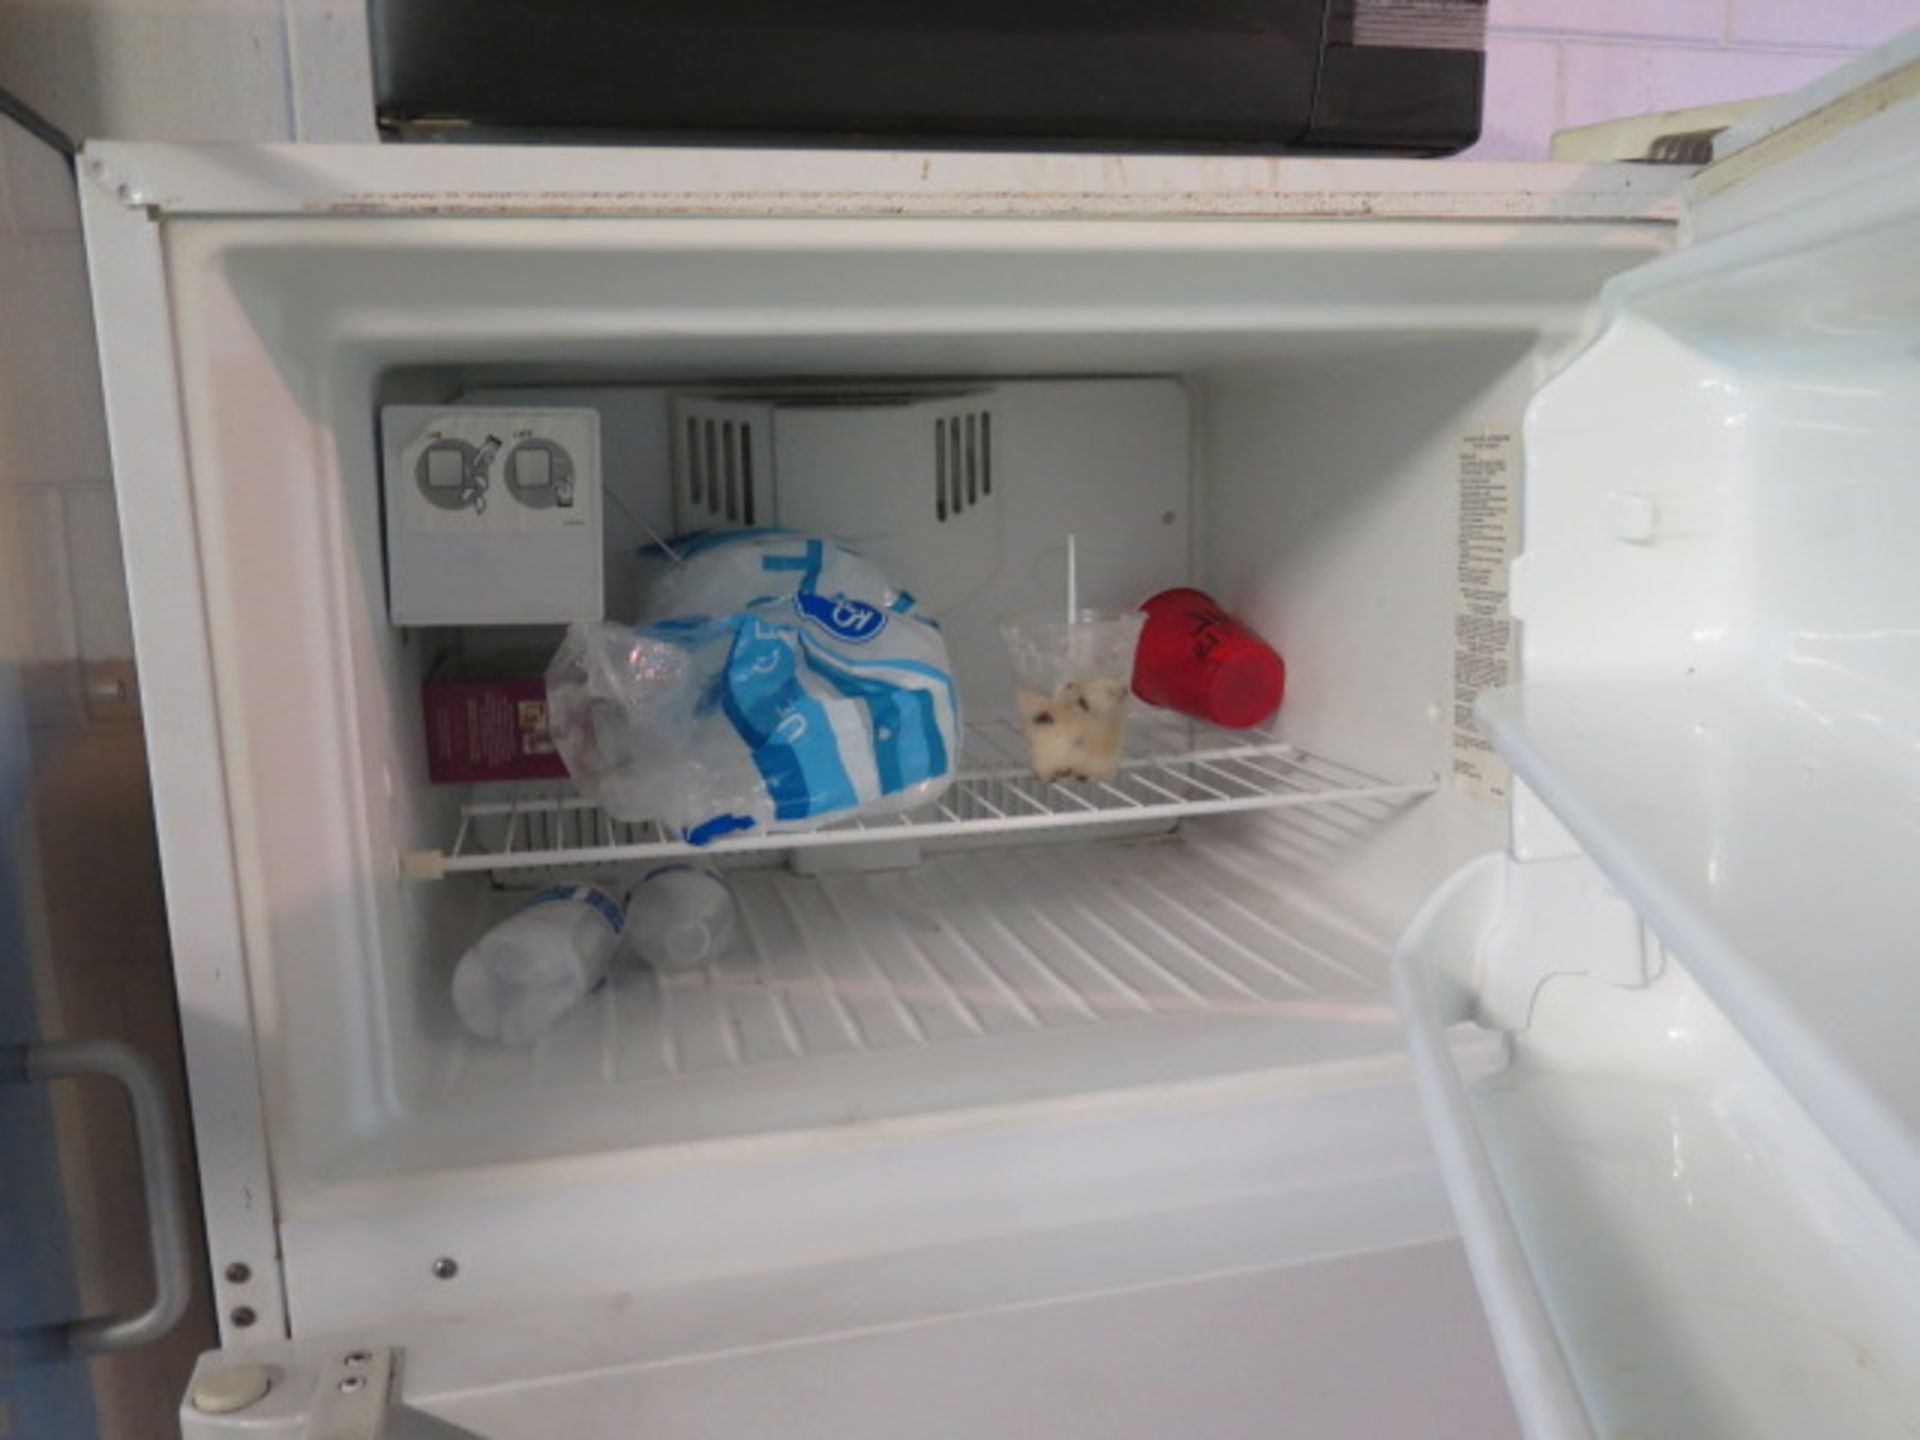 Refrigerator and Microwave (SOLD AS-IS - NO WARRANTY) - Image 3 of 4